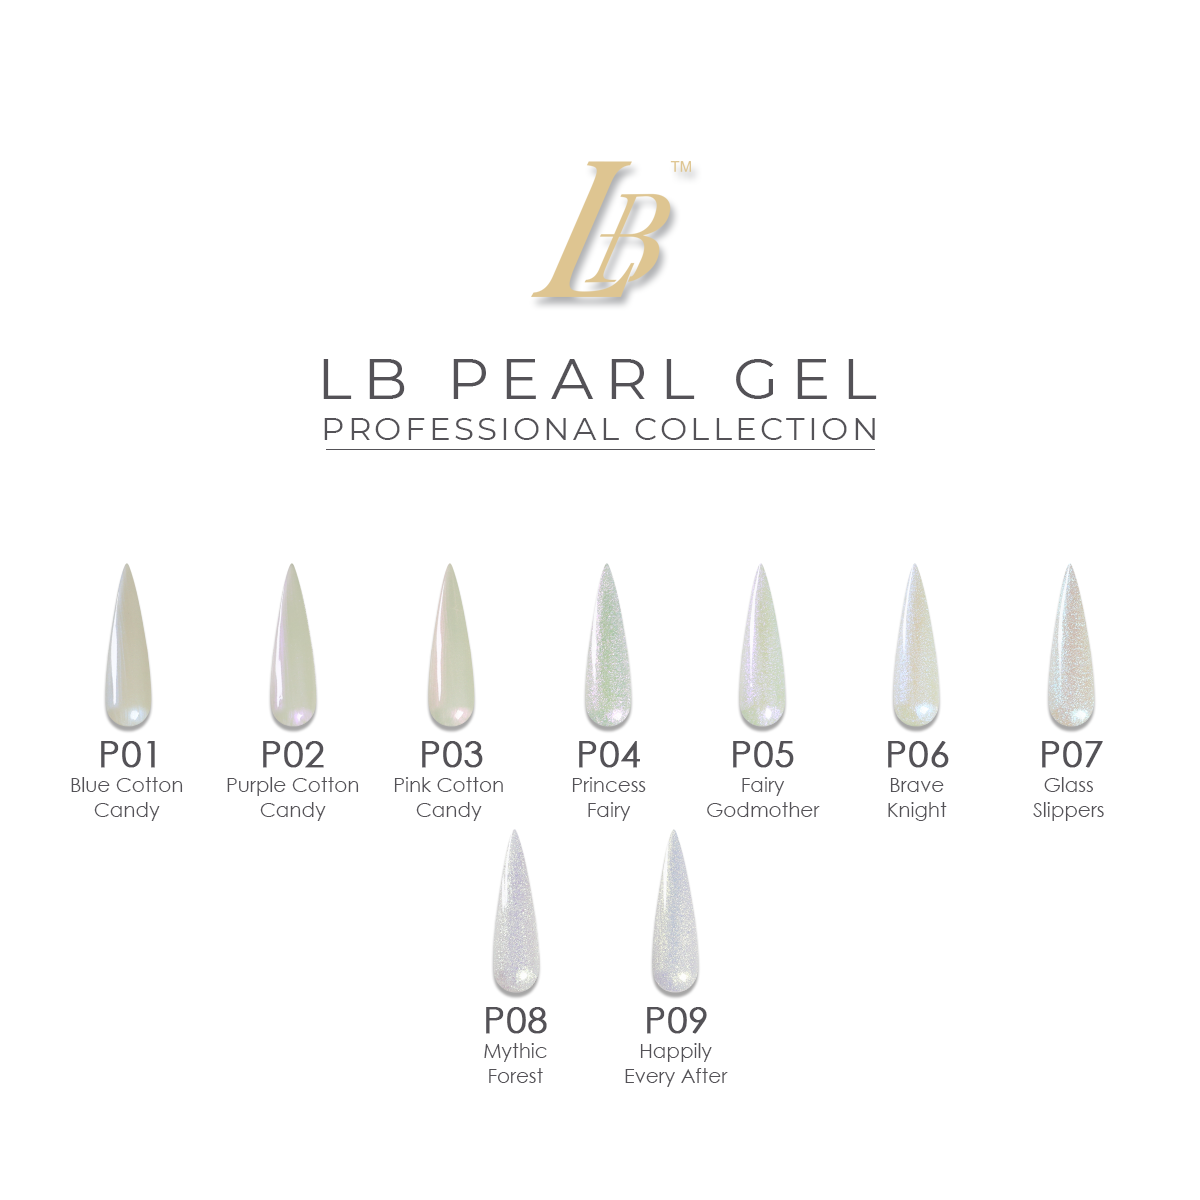 Pearl Gel Professional Collection